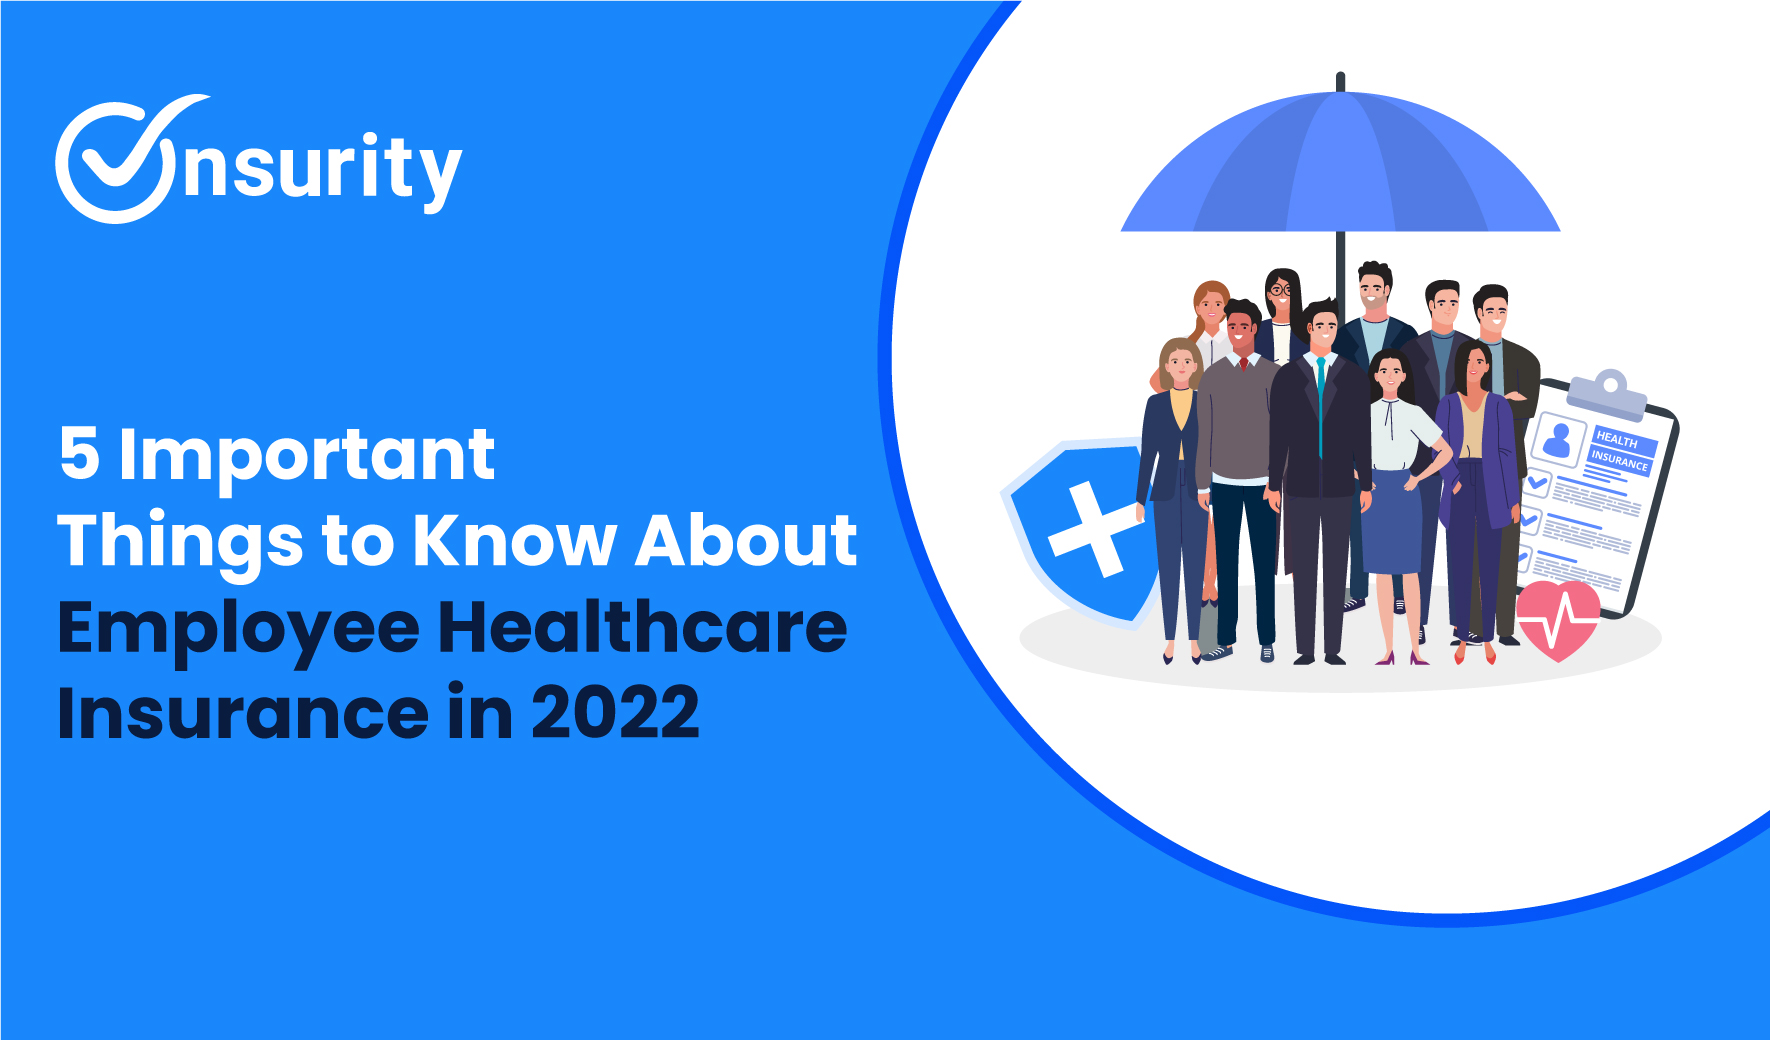 5 Important Things to Know About Employee Healthcare Insurance in 2022